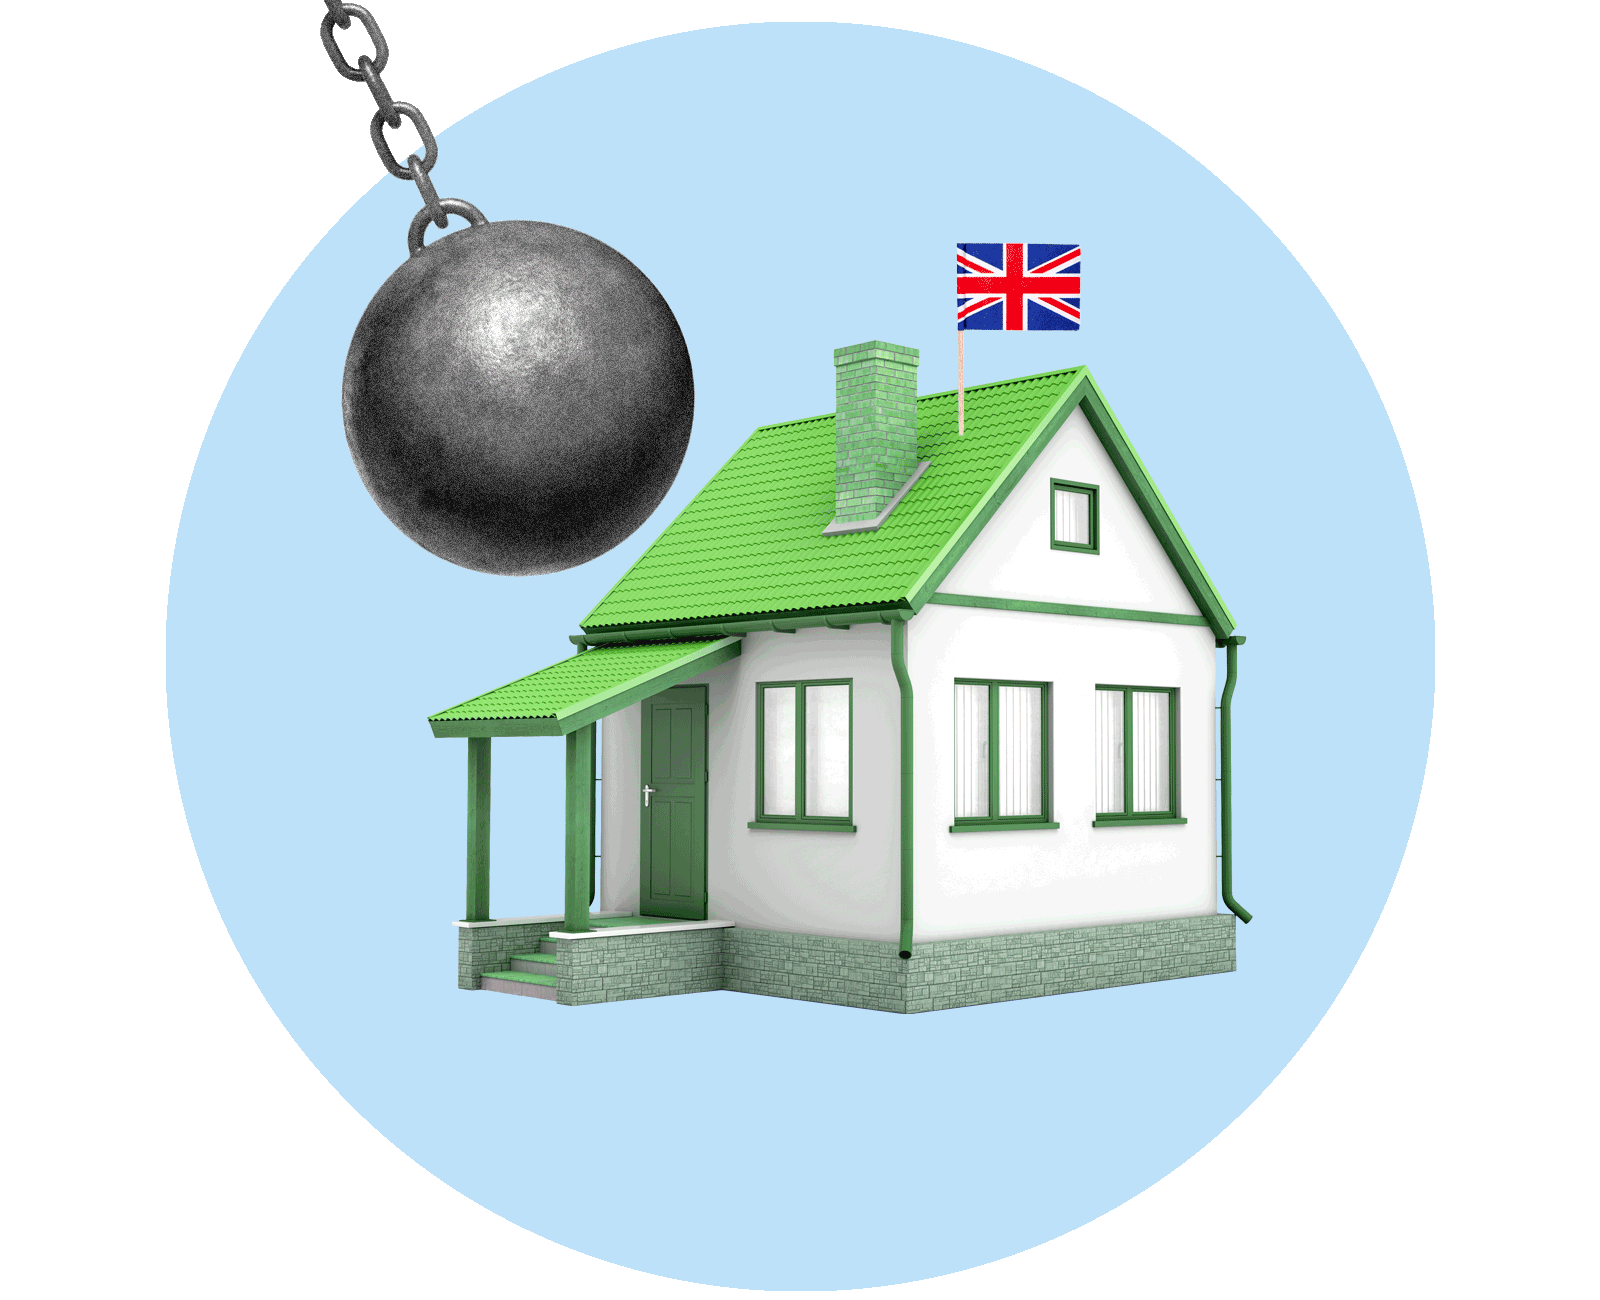 A wrecking ball swinging towards a green house with a UK flag on the roof